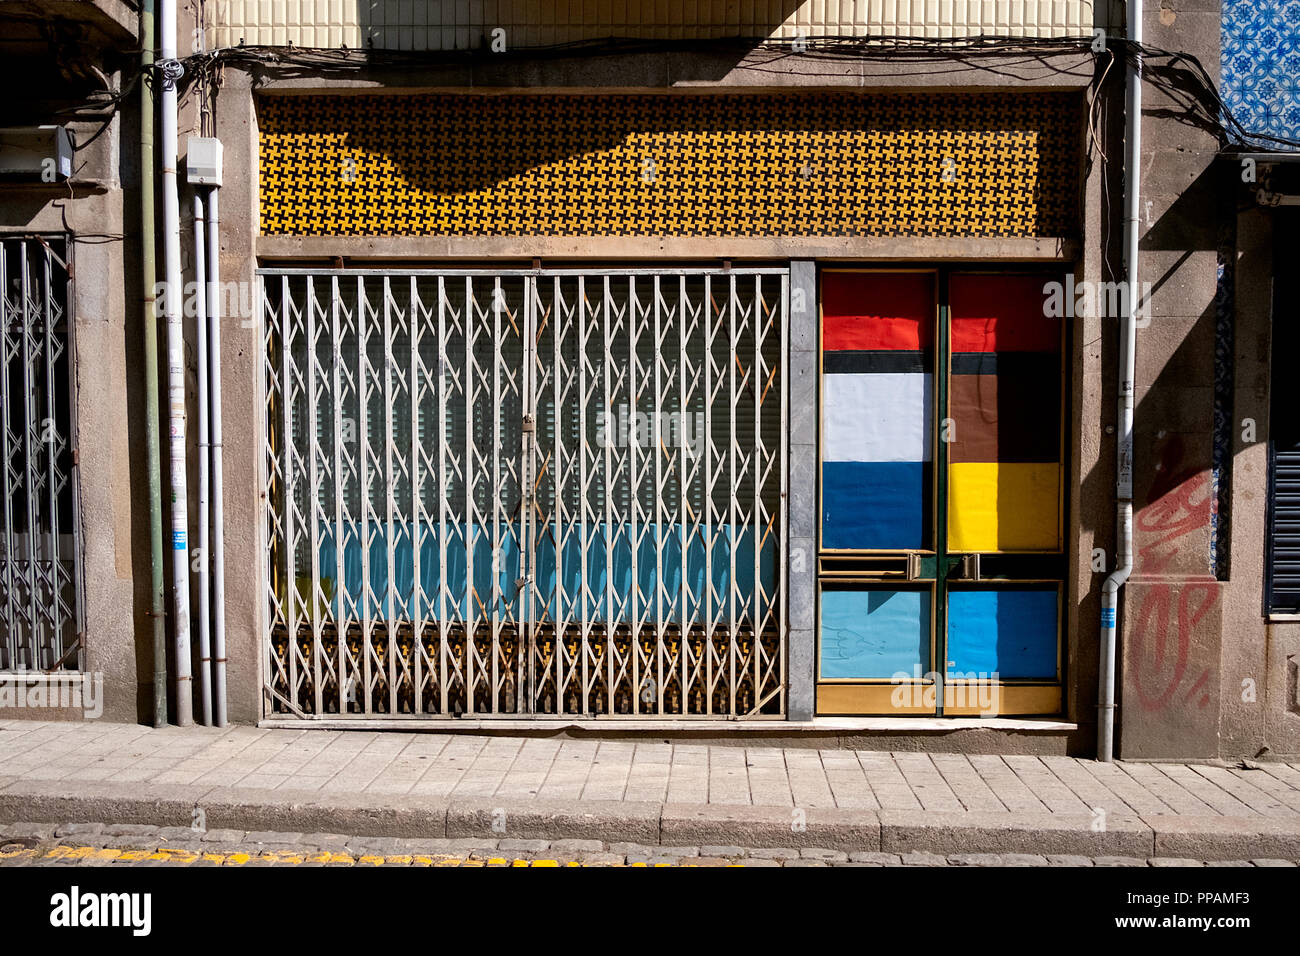 facade of an old and abandoned store with colorful Portuguese tiles and super colorful door inspired the Mondrian paints and pictures. Stock Photo